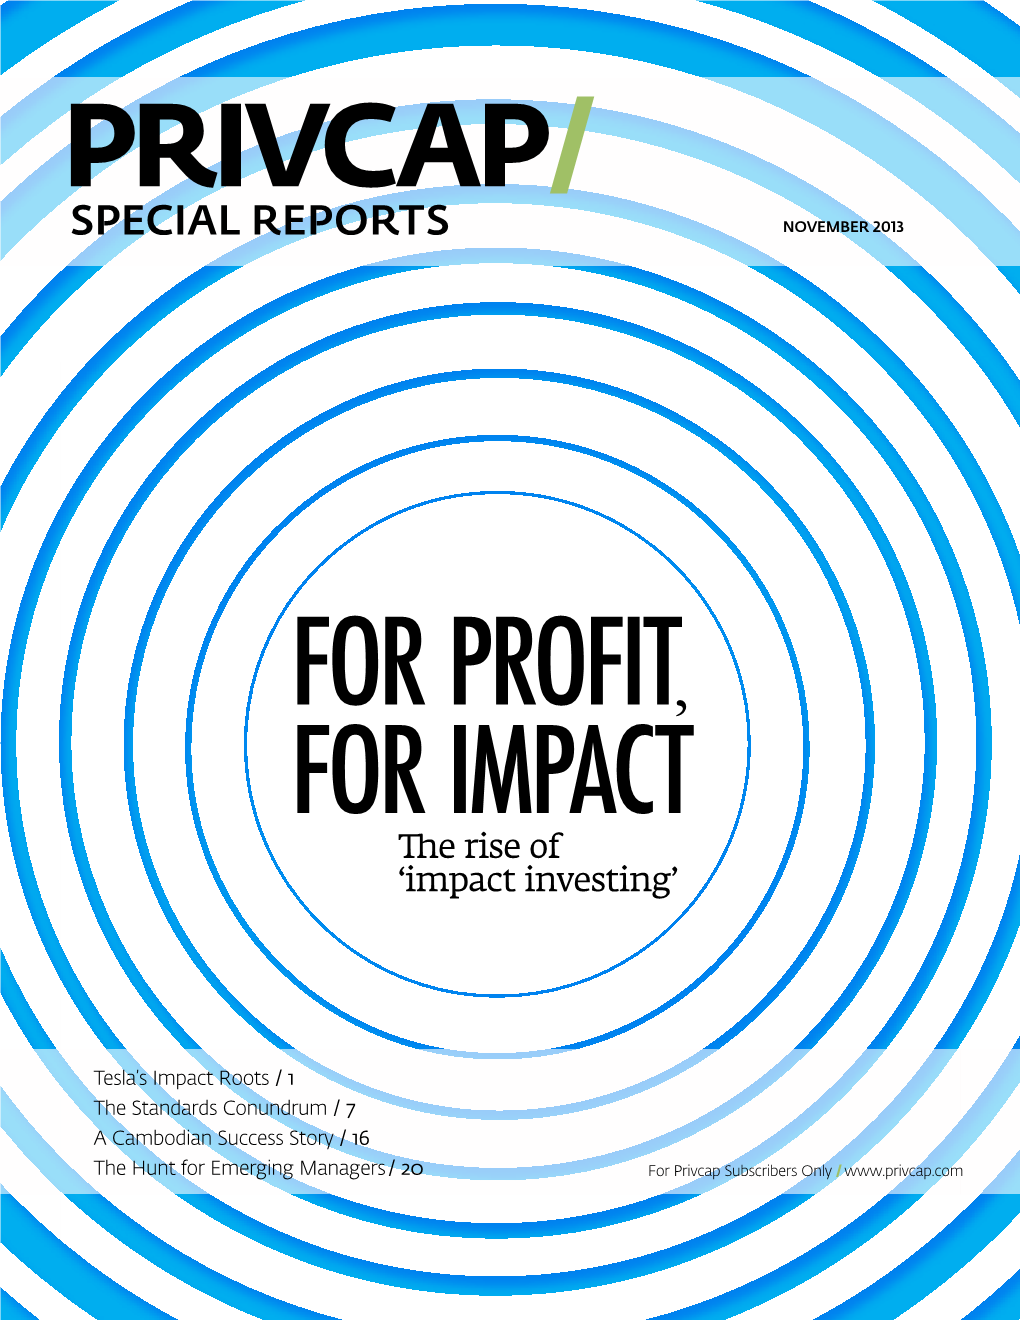 Privcap Special Reports Privcap Special Reports Are Exclusively for Subscribers to Privcap, the Deﬁnitive Channel for Thought Leadership in Private Capital